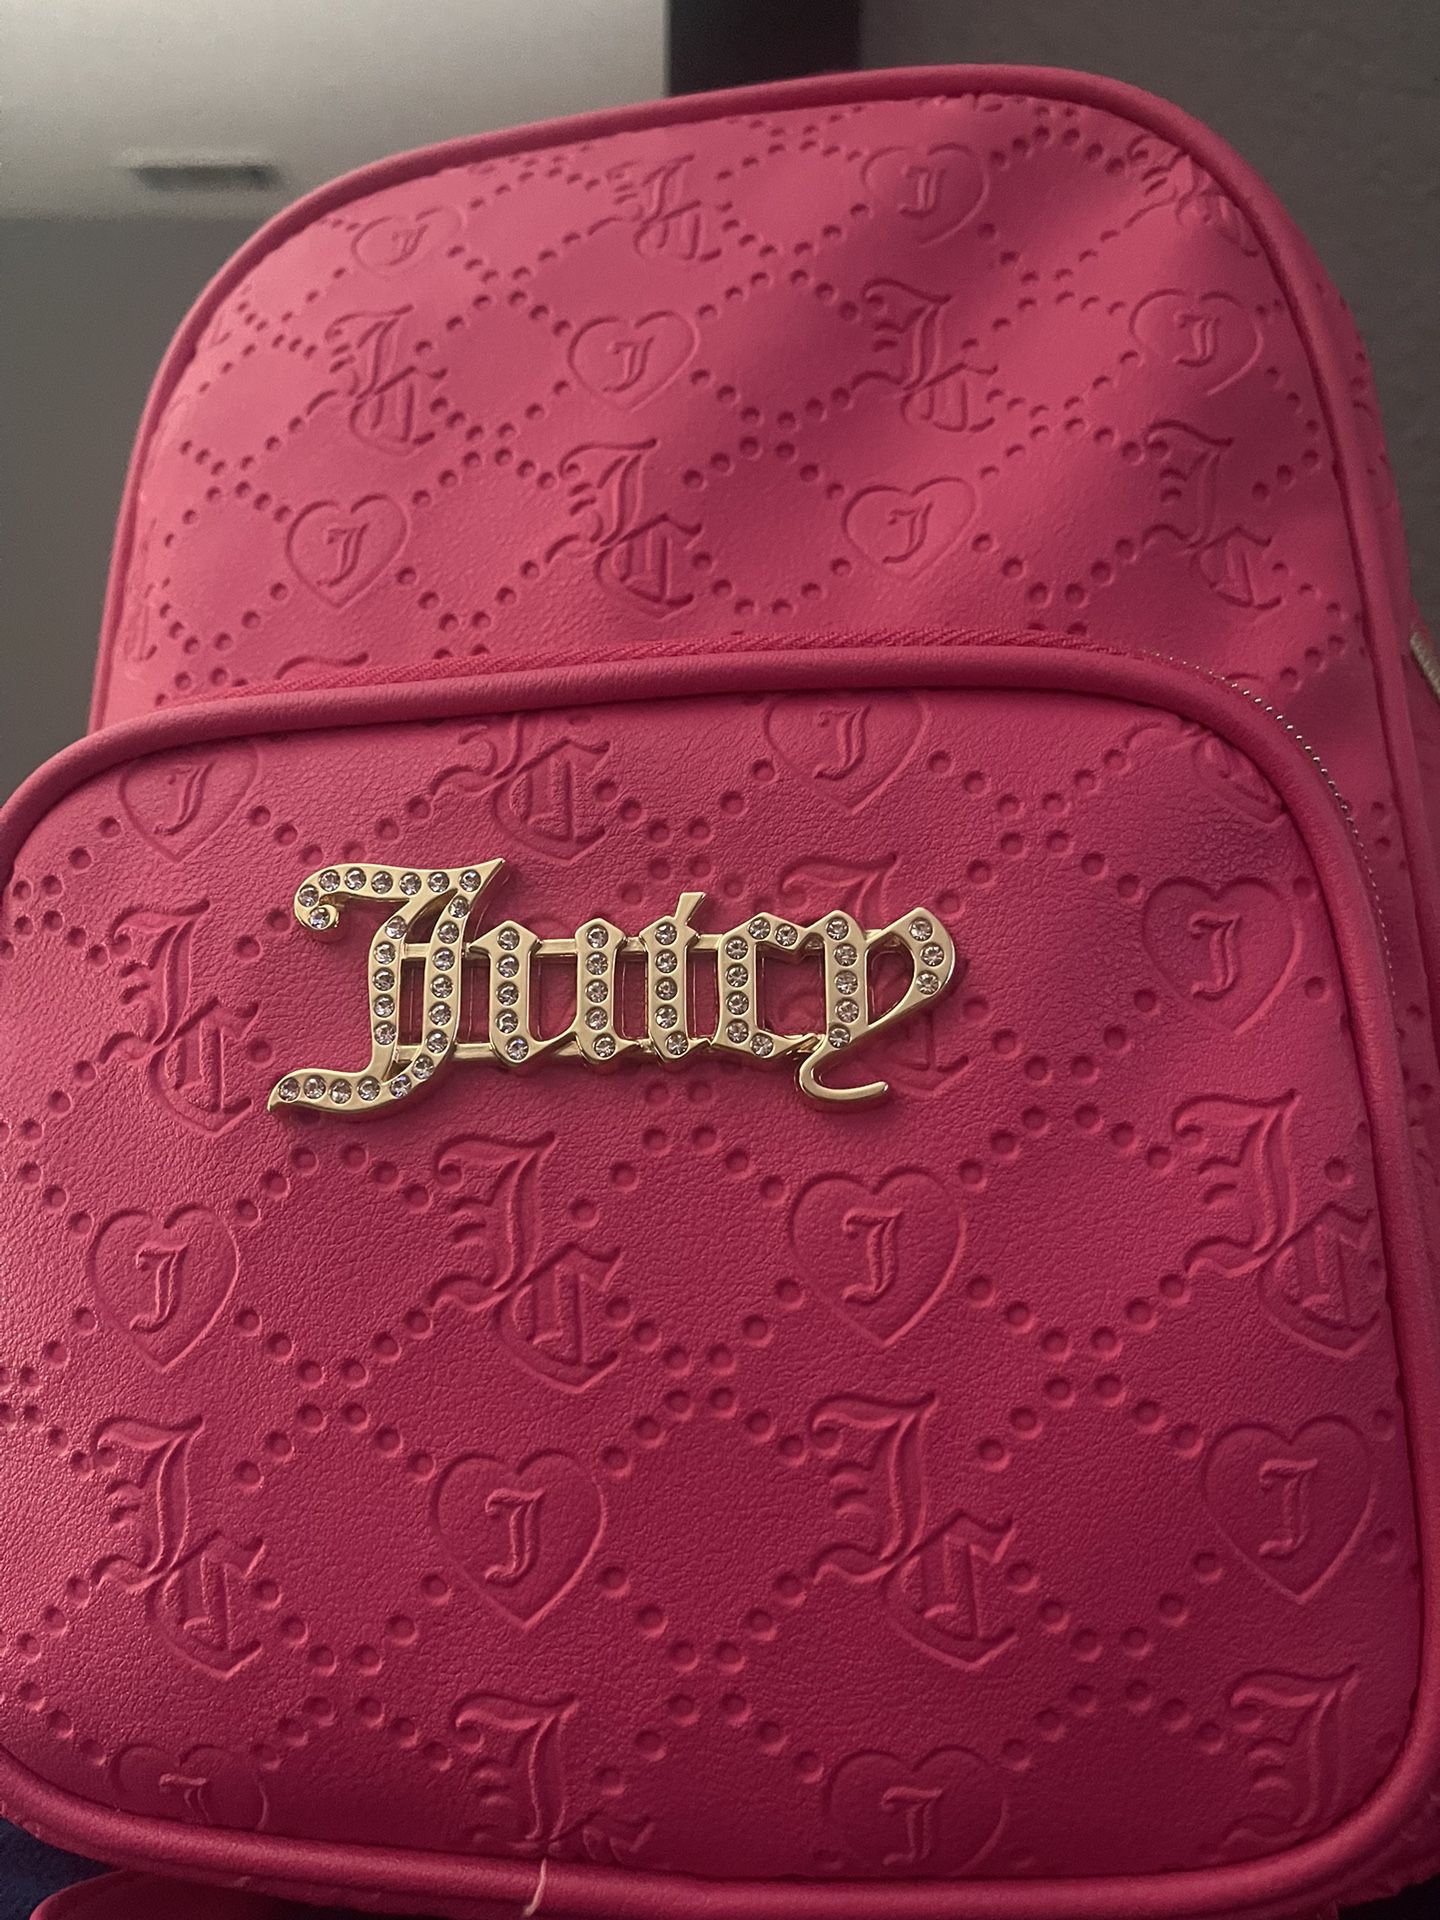 Juicy Couture Backpack Bag